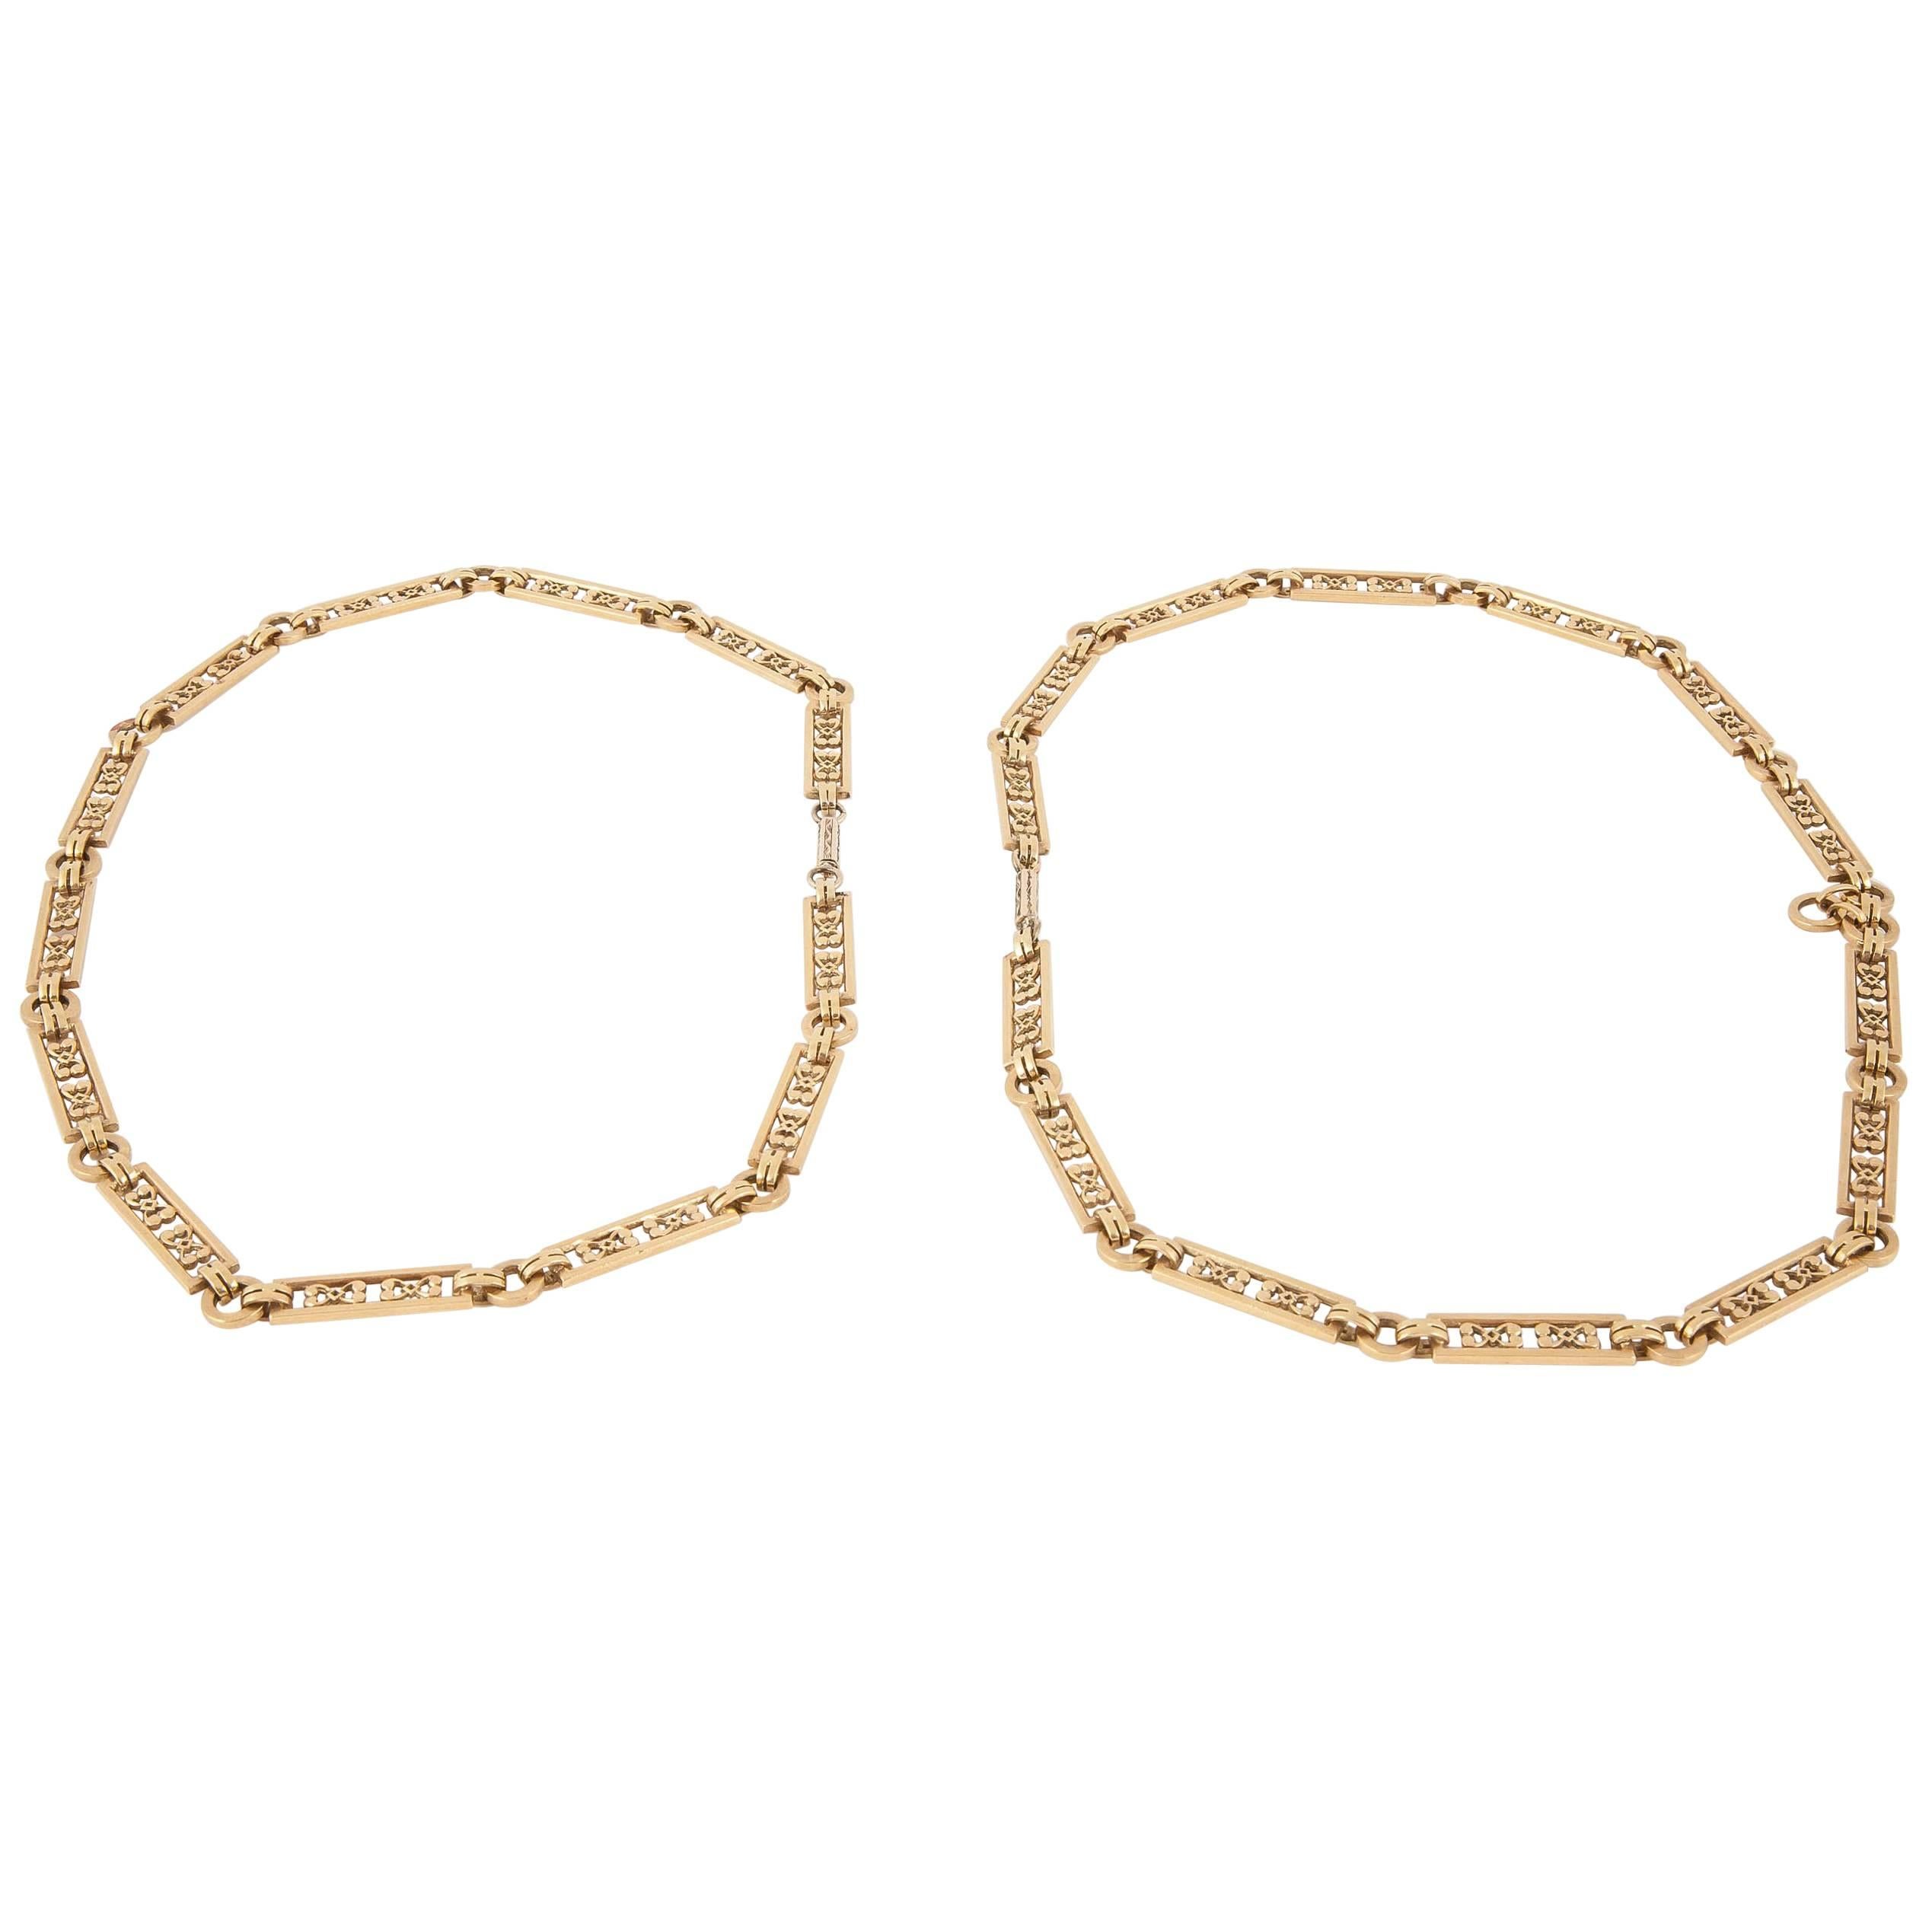 Necklace, Gold Openwork Forming Two Shorter necklaces circa 1910, heavy quality For Sale